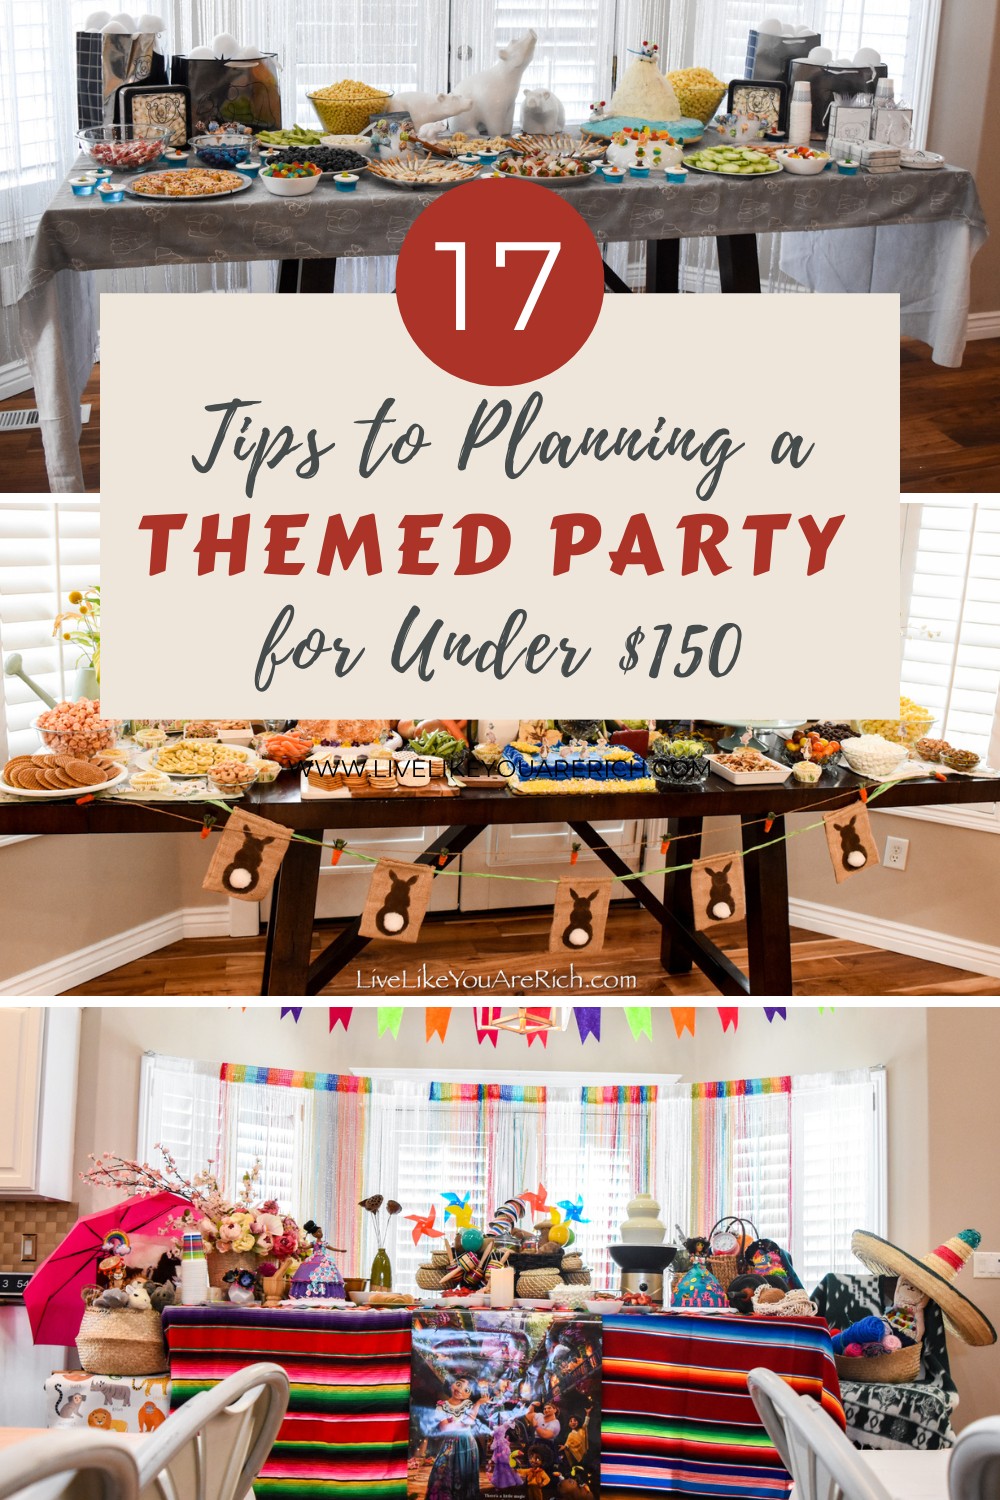 17 Tips to Planning a Themed Party for Under $150